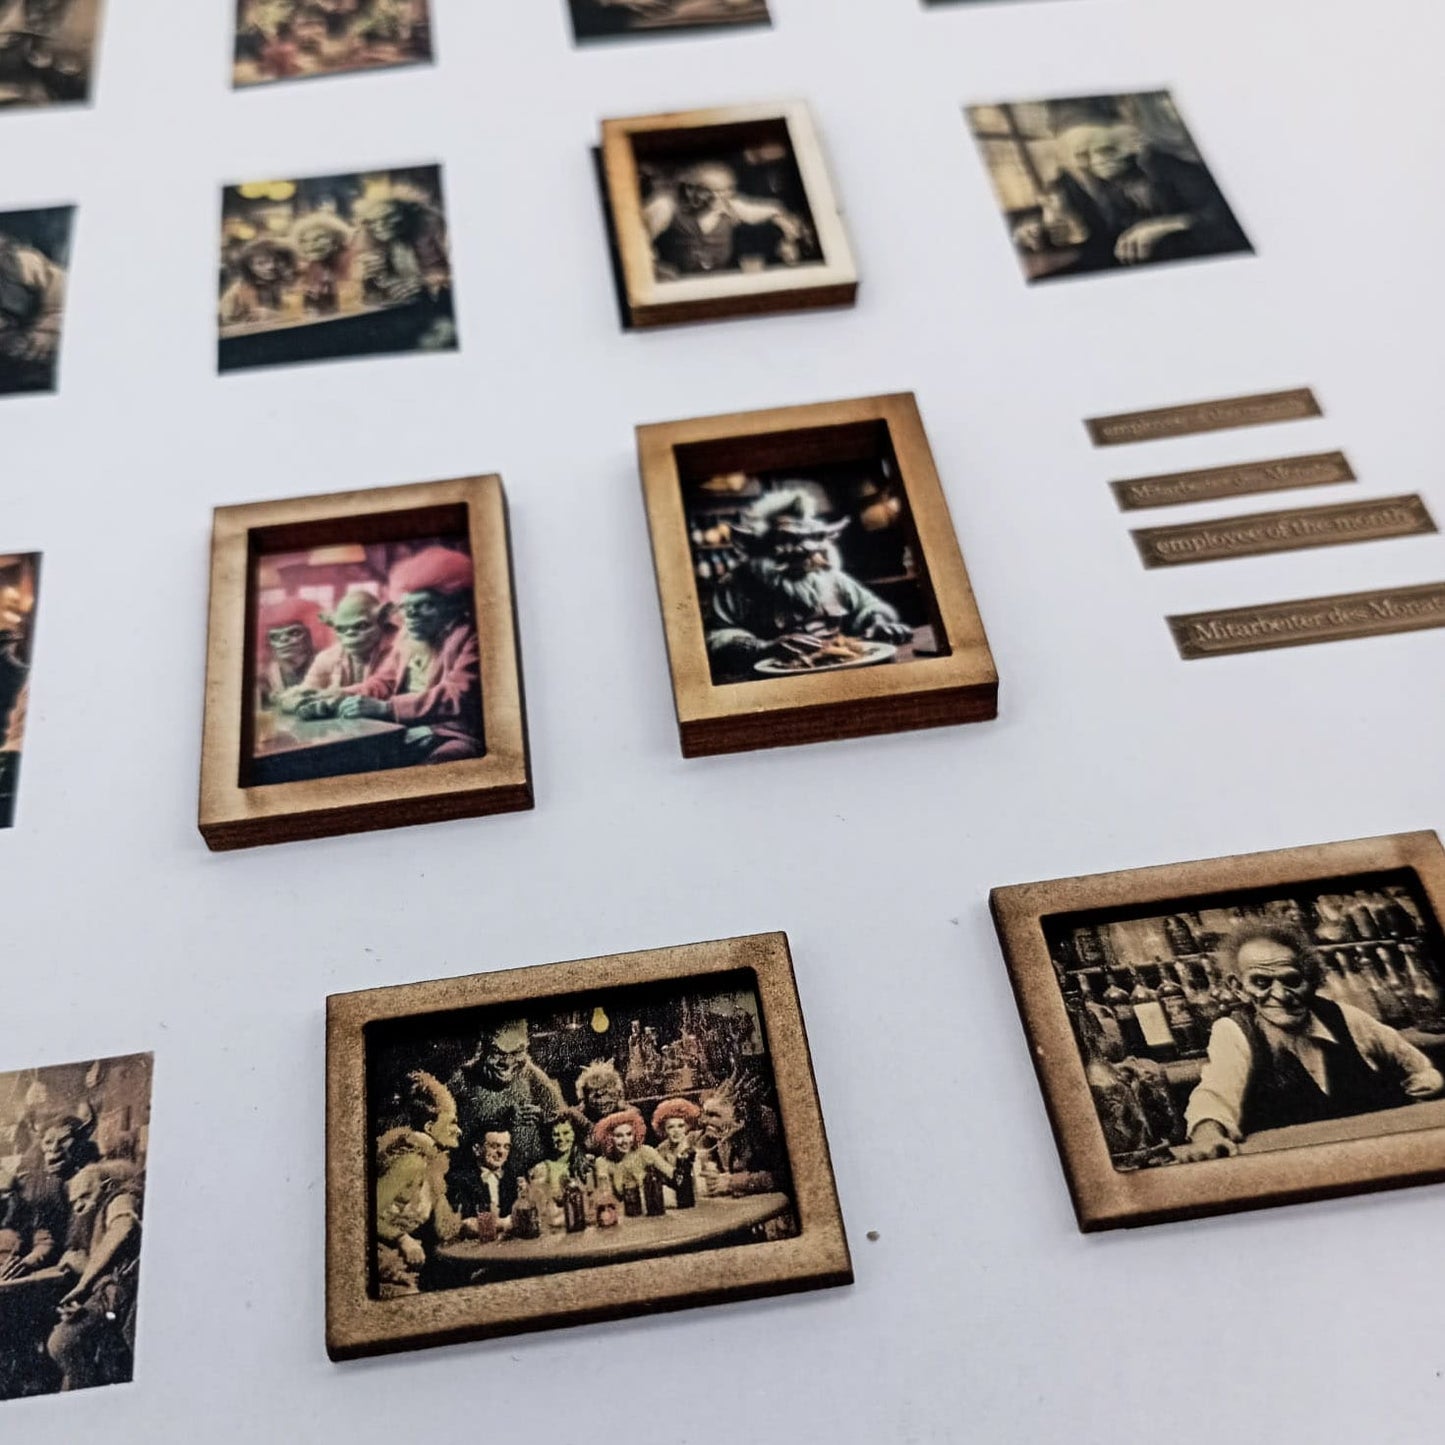 1:12 scale miniature troll photos in picture frames